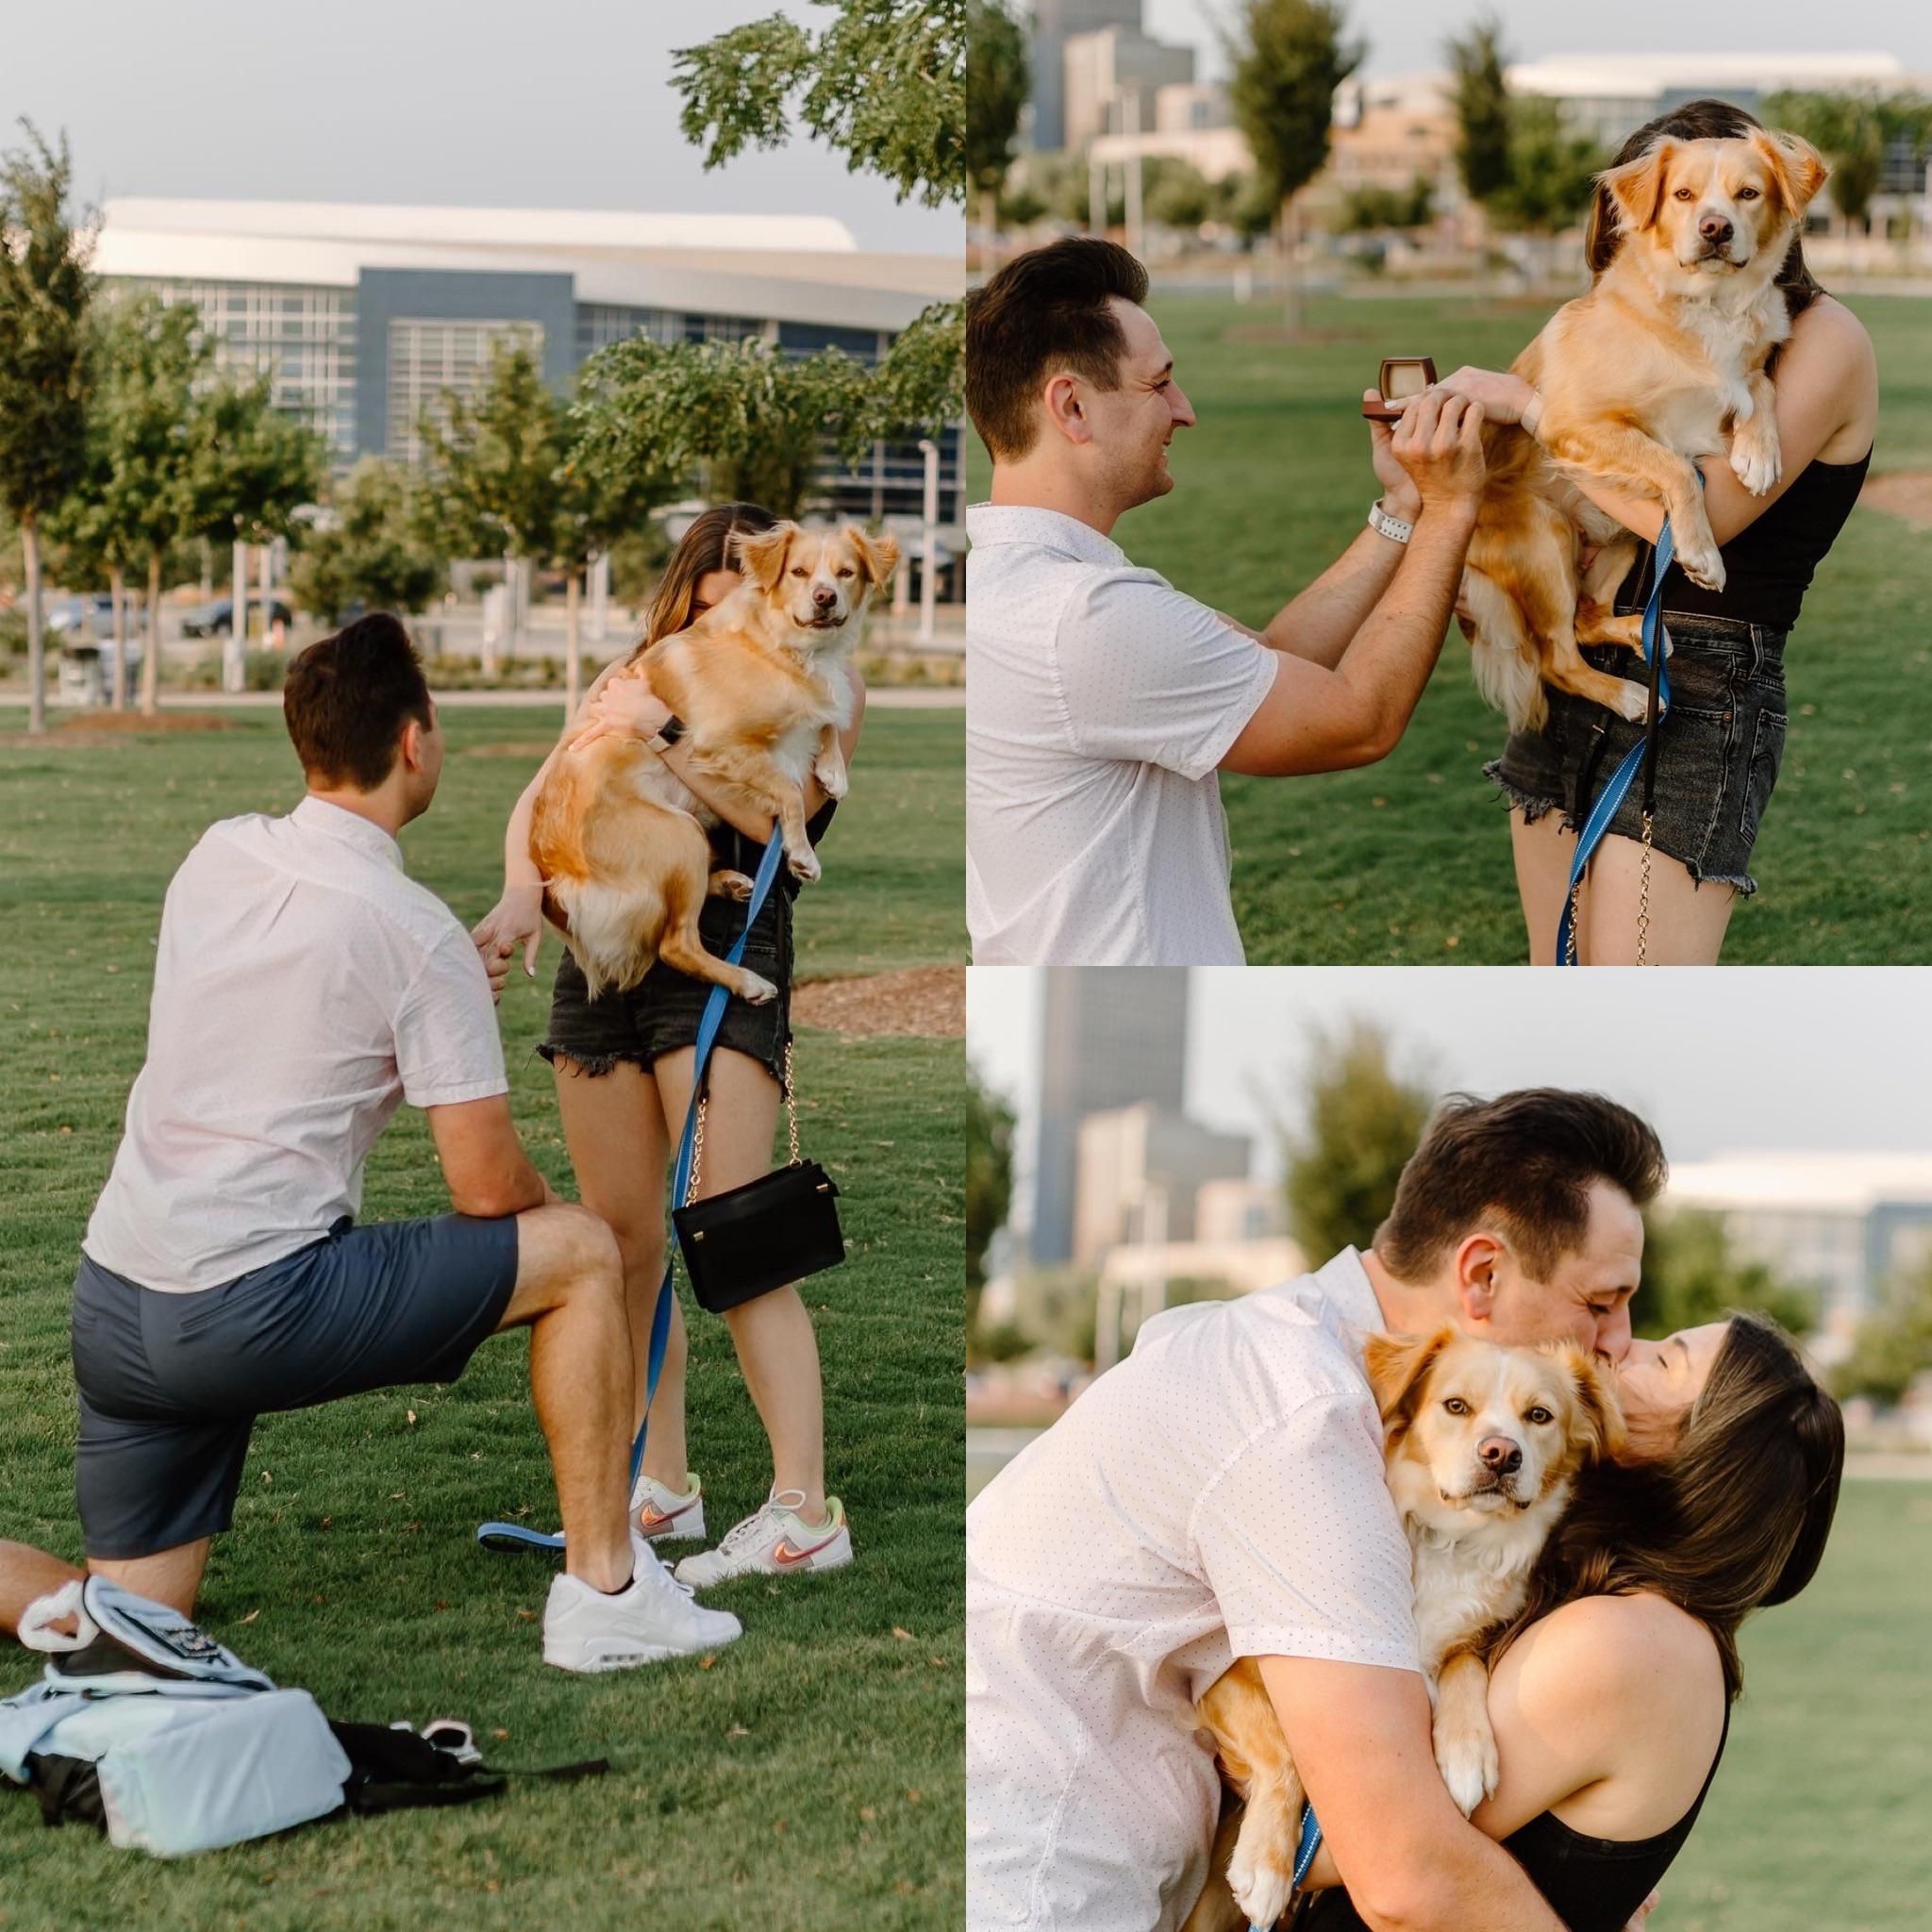 We got engaged, but my dog was absolutely positive the photographer was there for her.